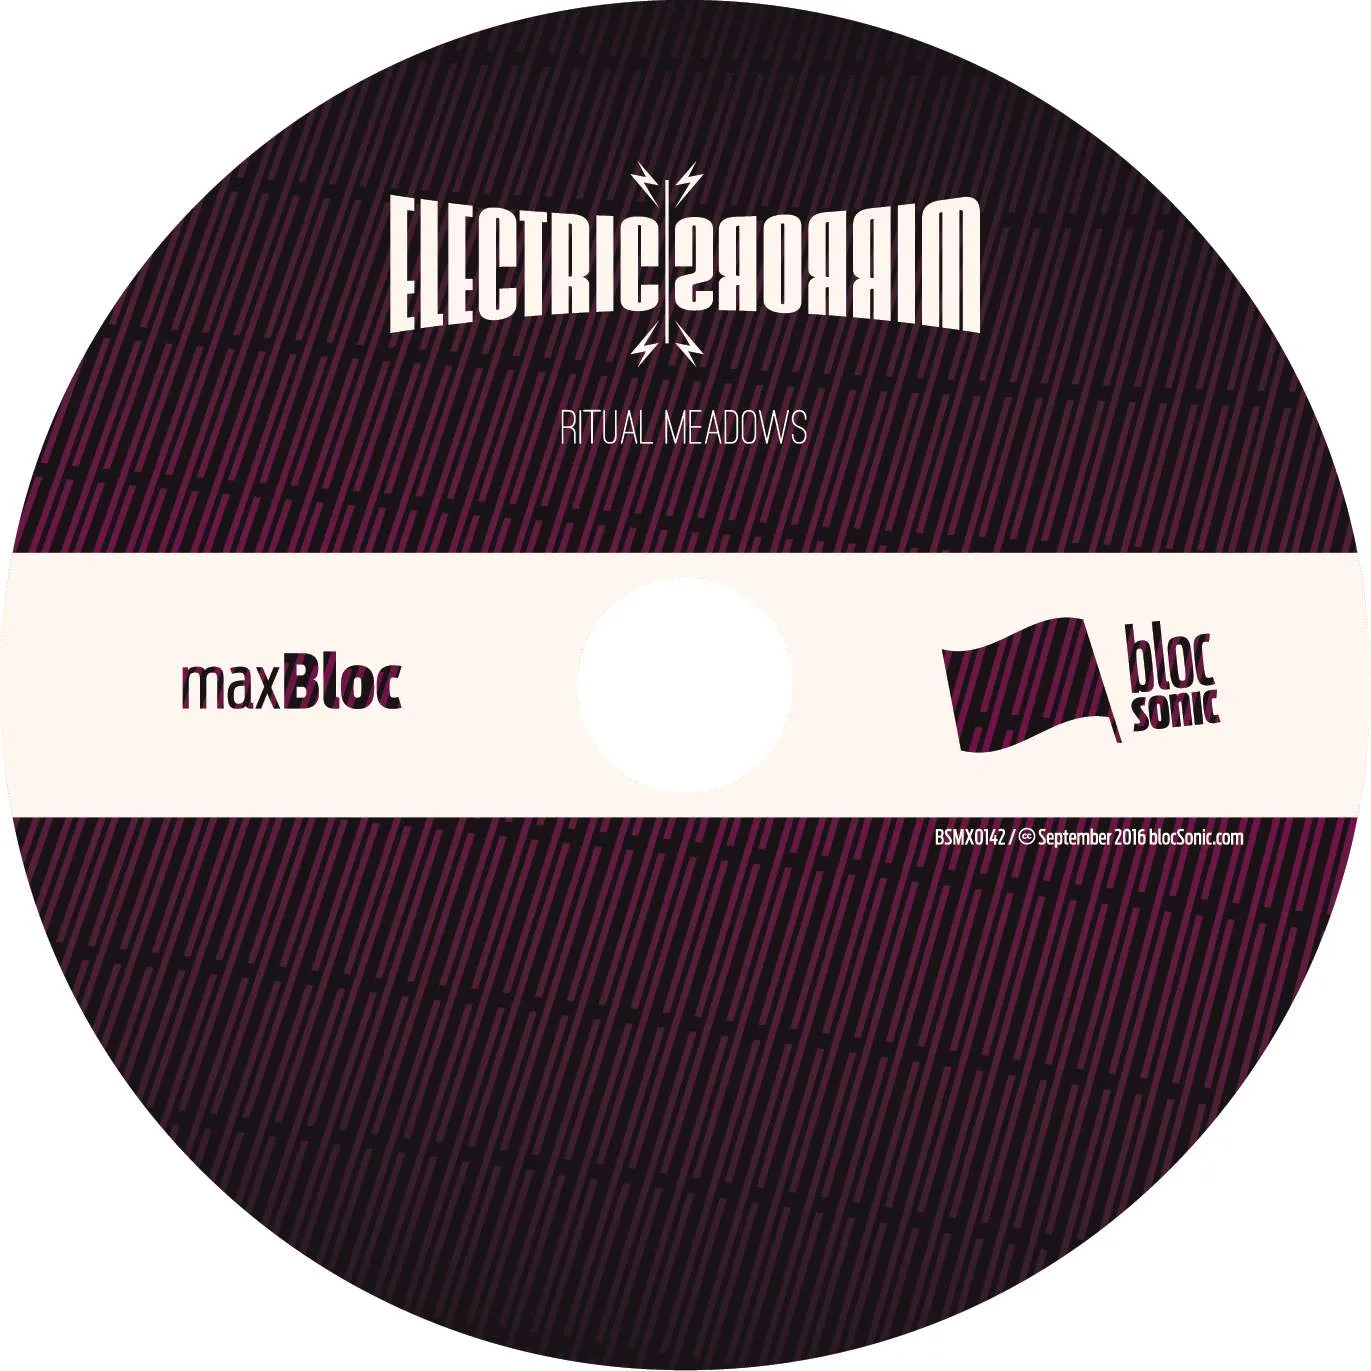 Album disc for “Ritual Meadows” by Electric Mirrors